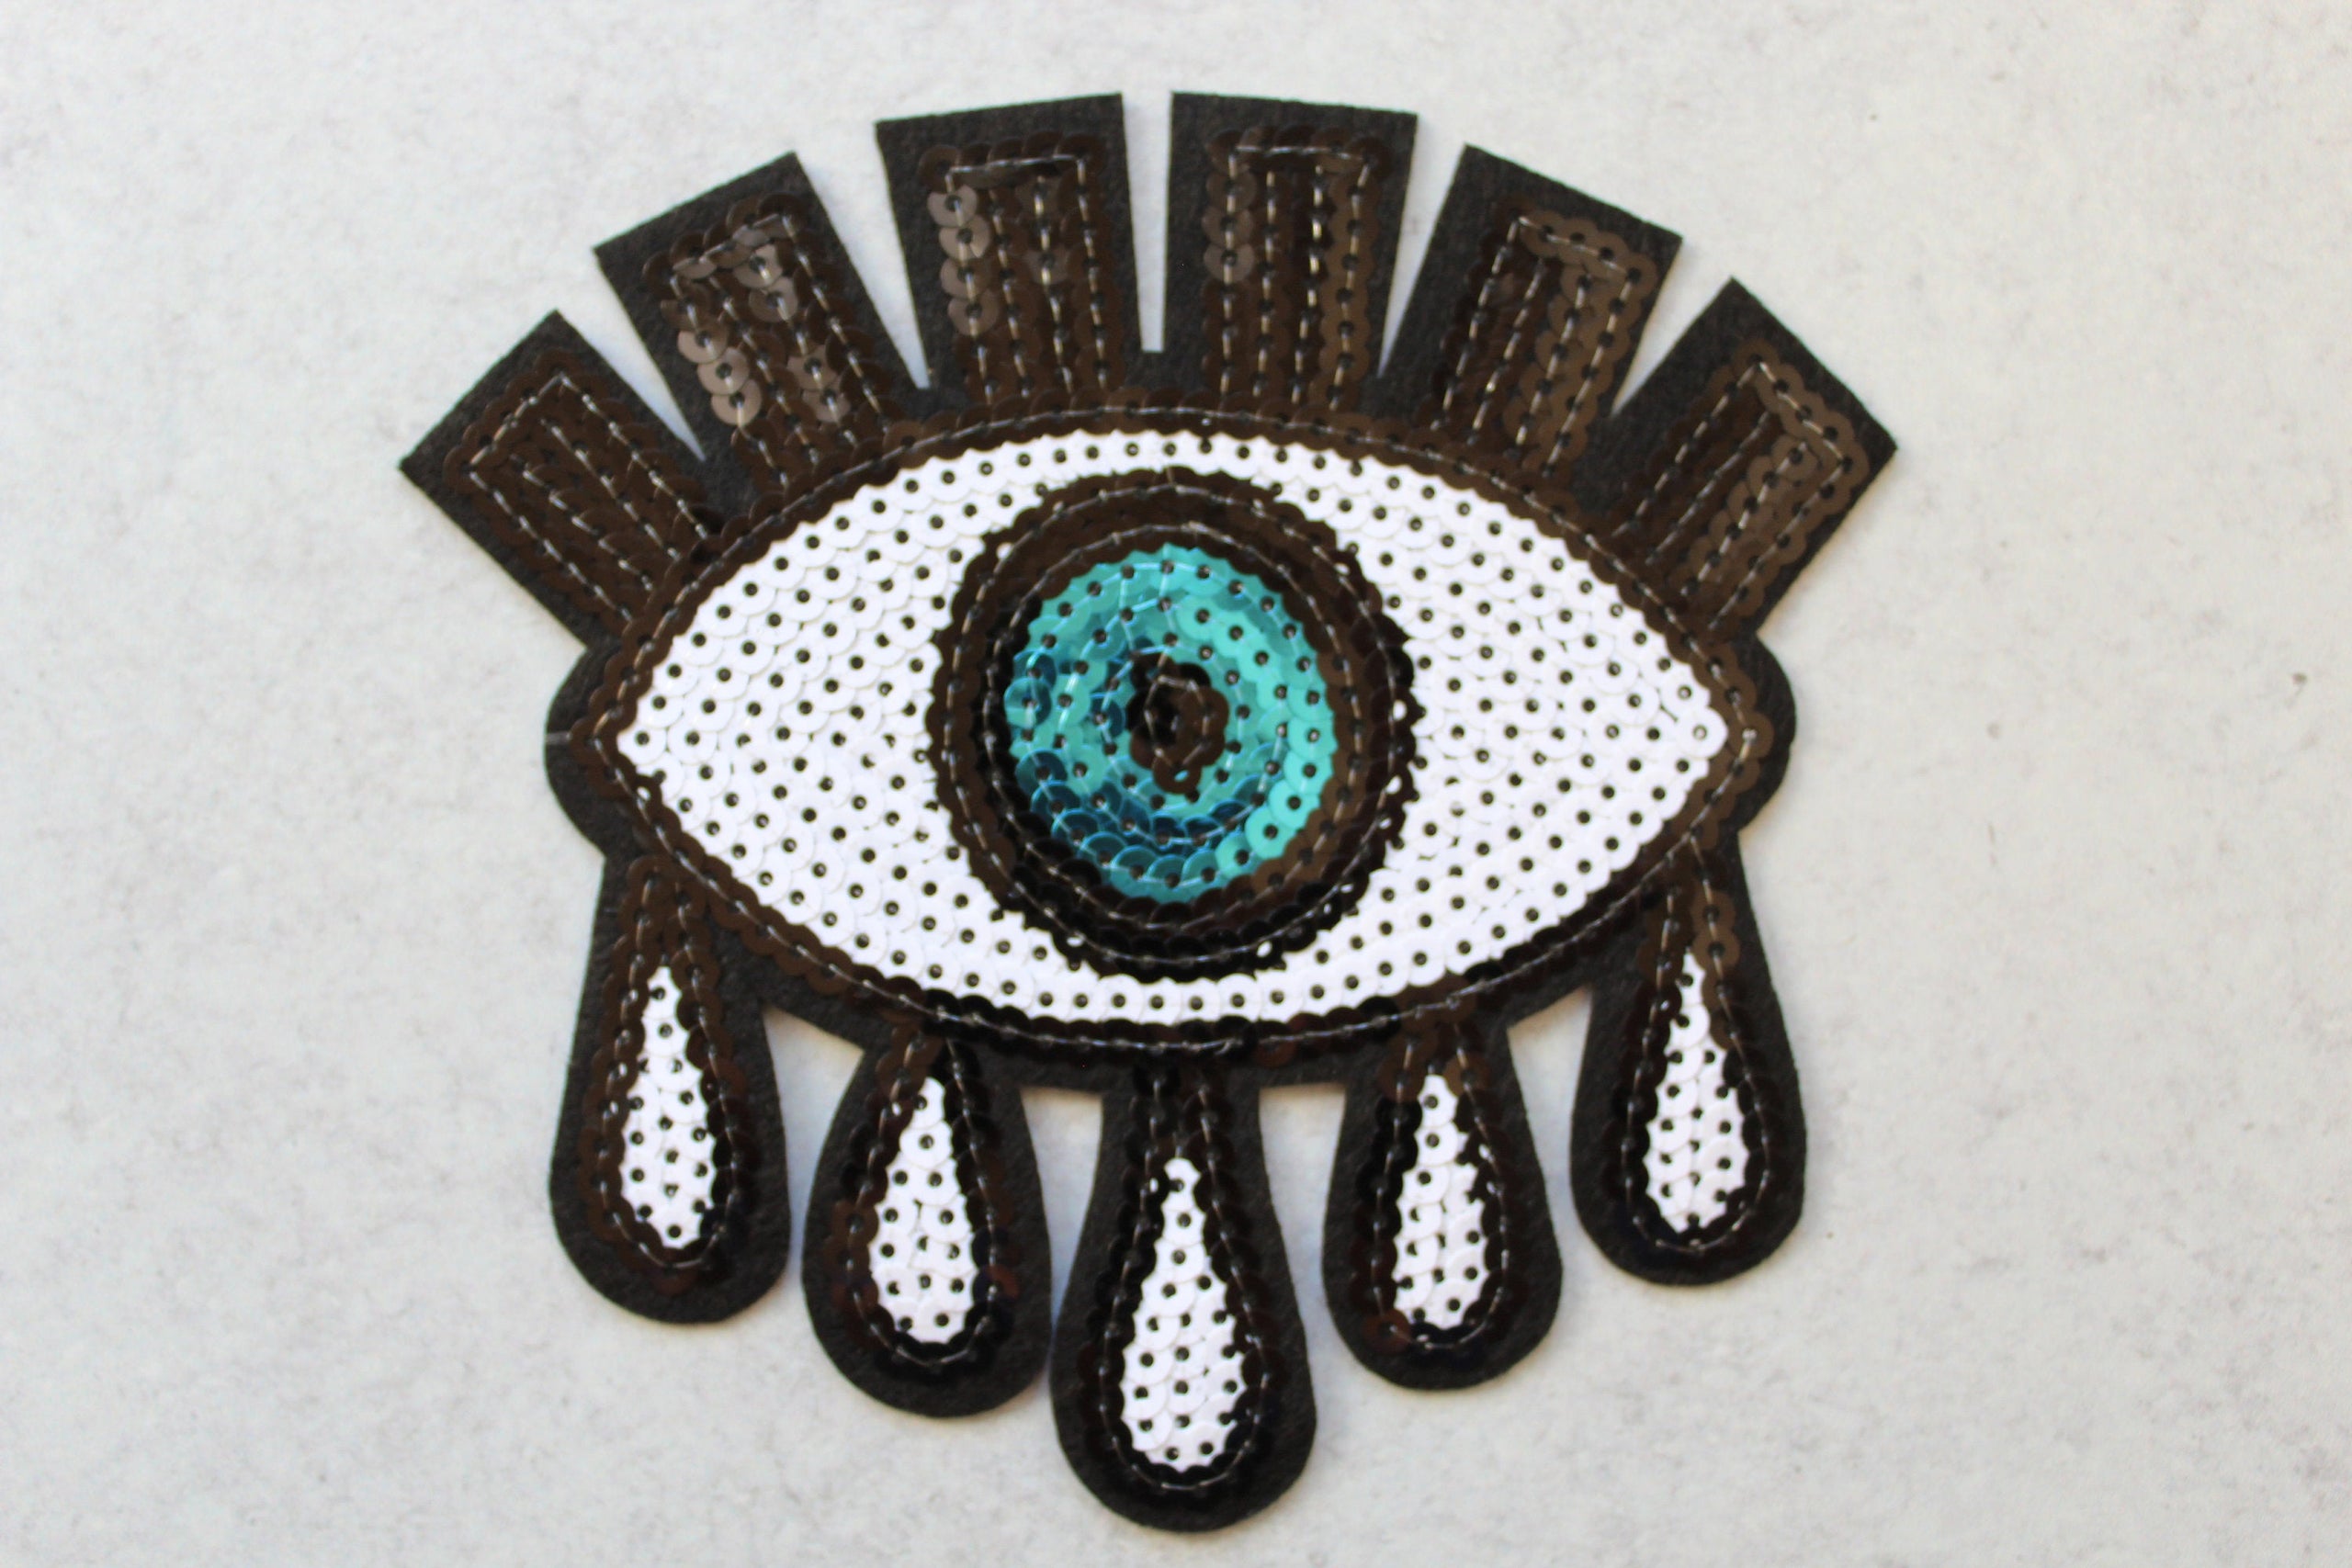 New Color 10 Sequin Blue/dark Gold Evil Eye Patch Iron -  Norway